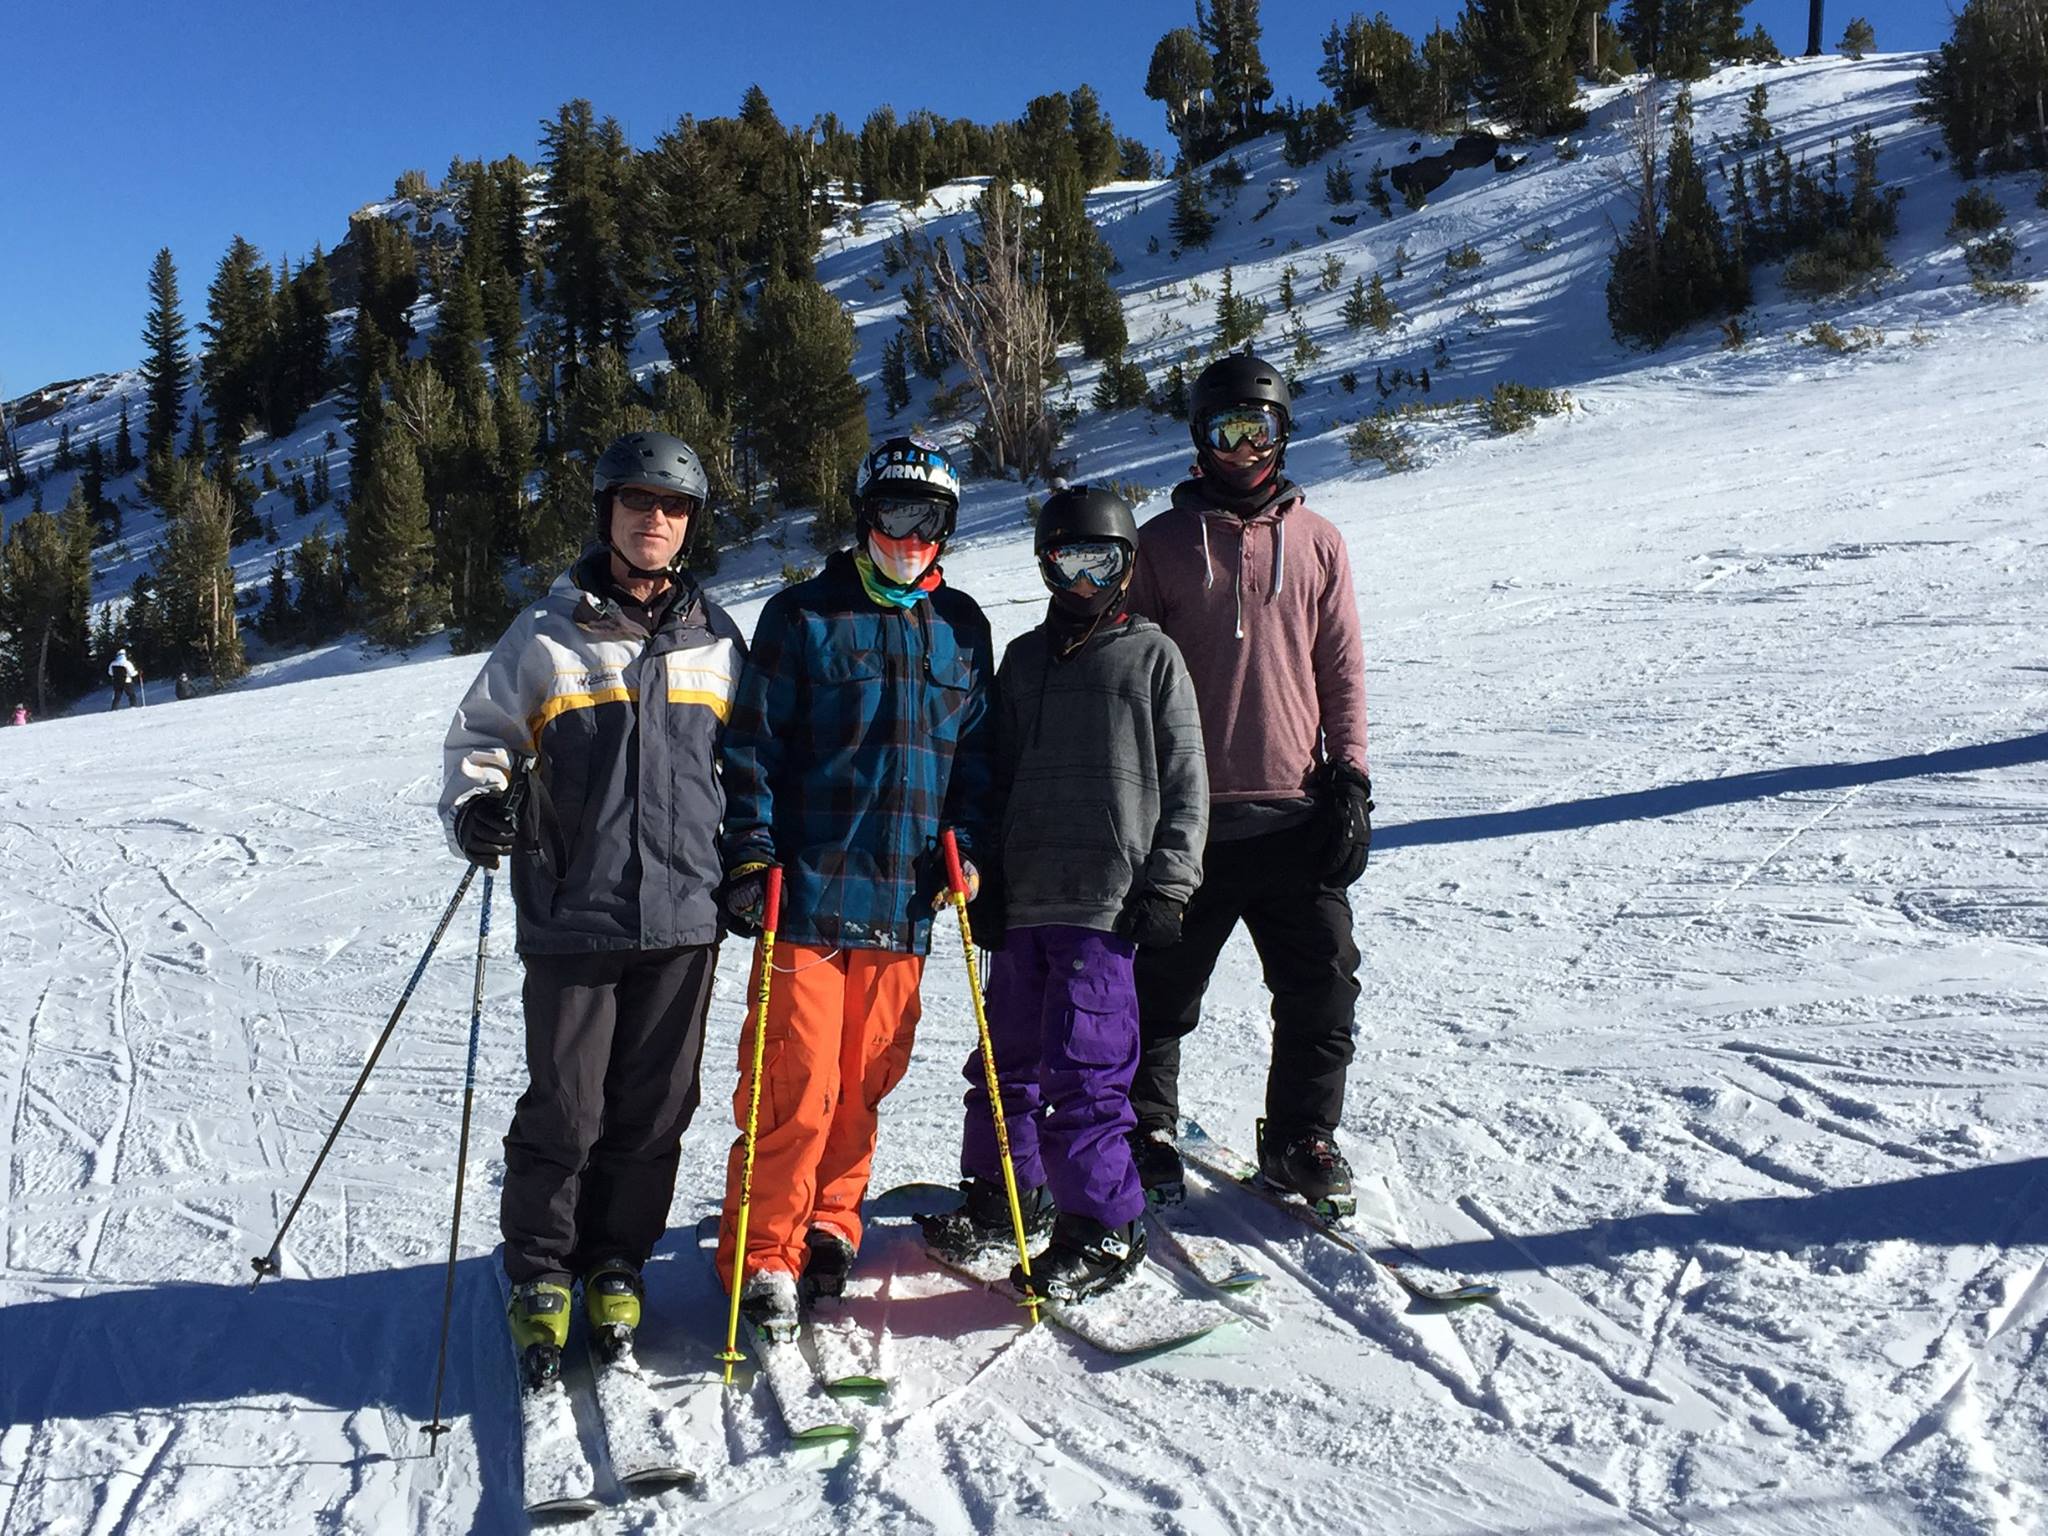 Mammoth Mountain, California Skiing and rowing this month! Sean in the orange pants skiing with family and friends!